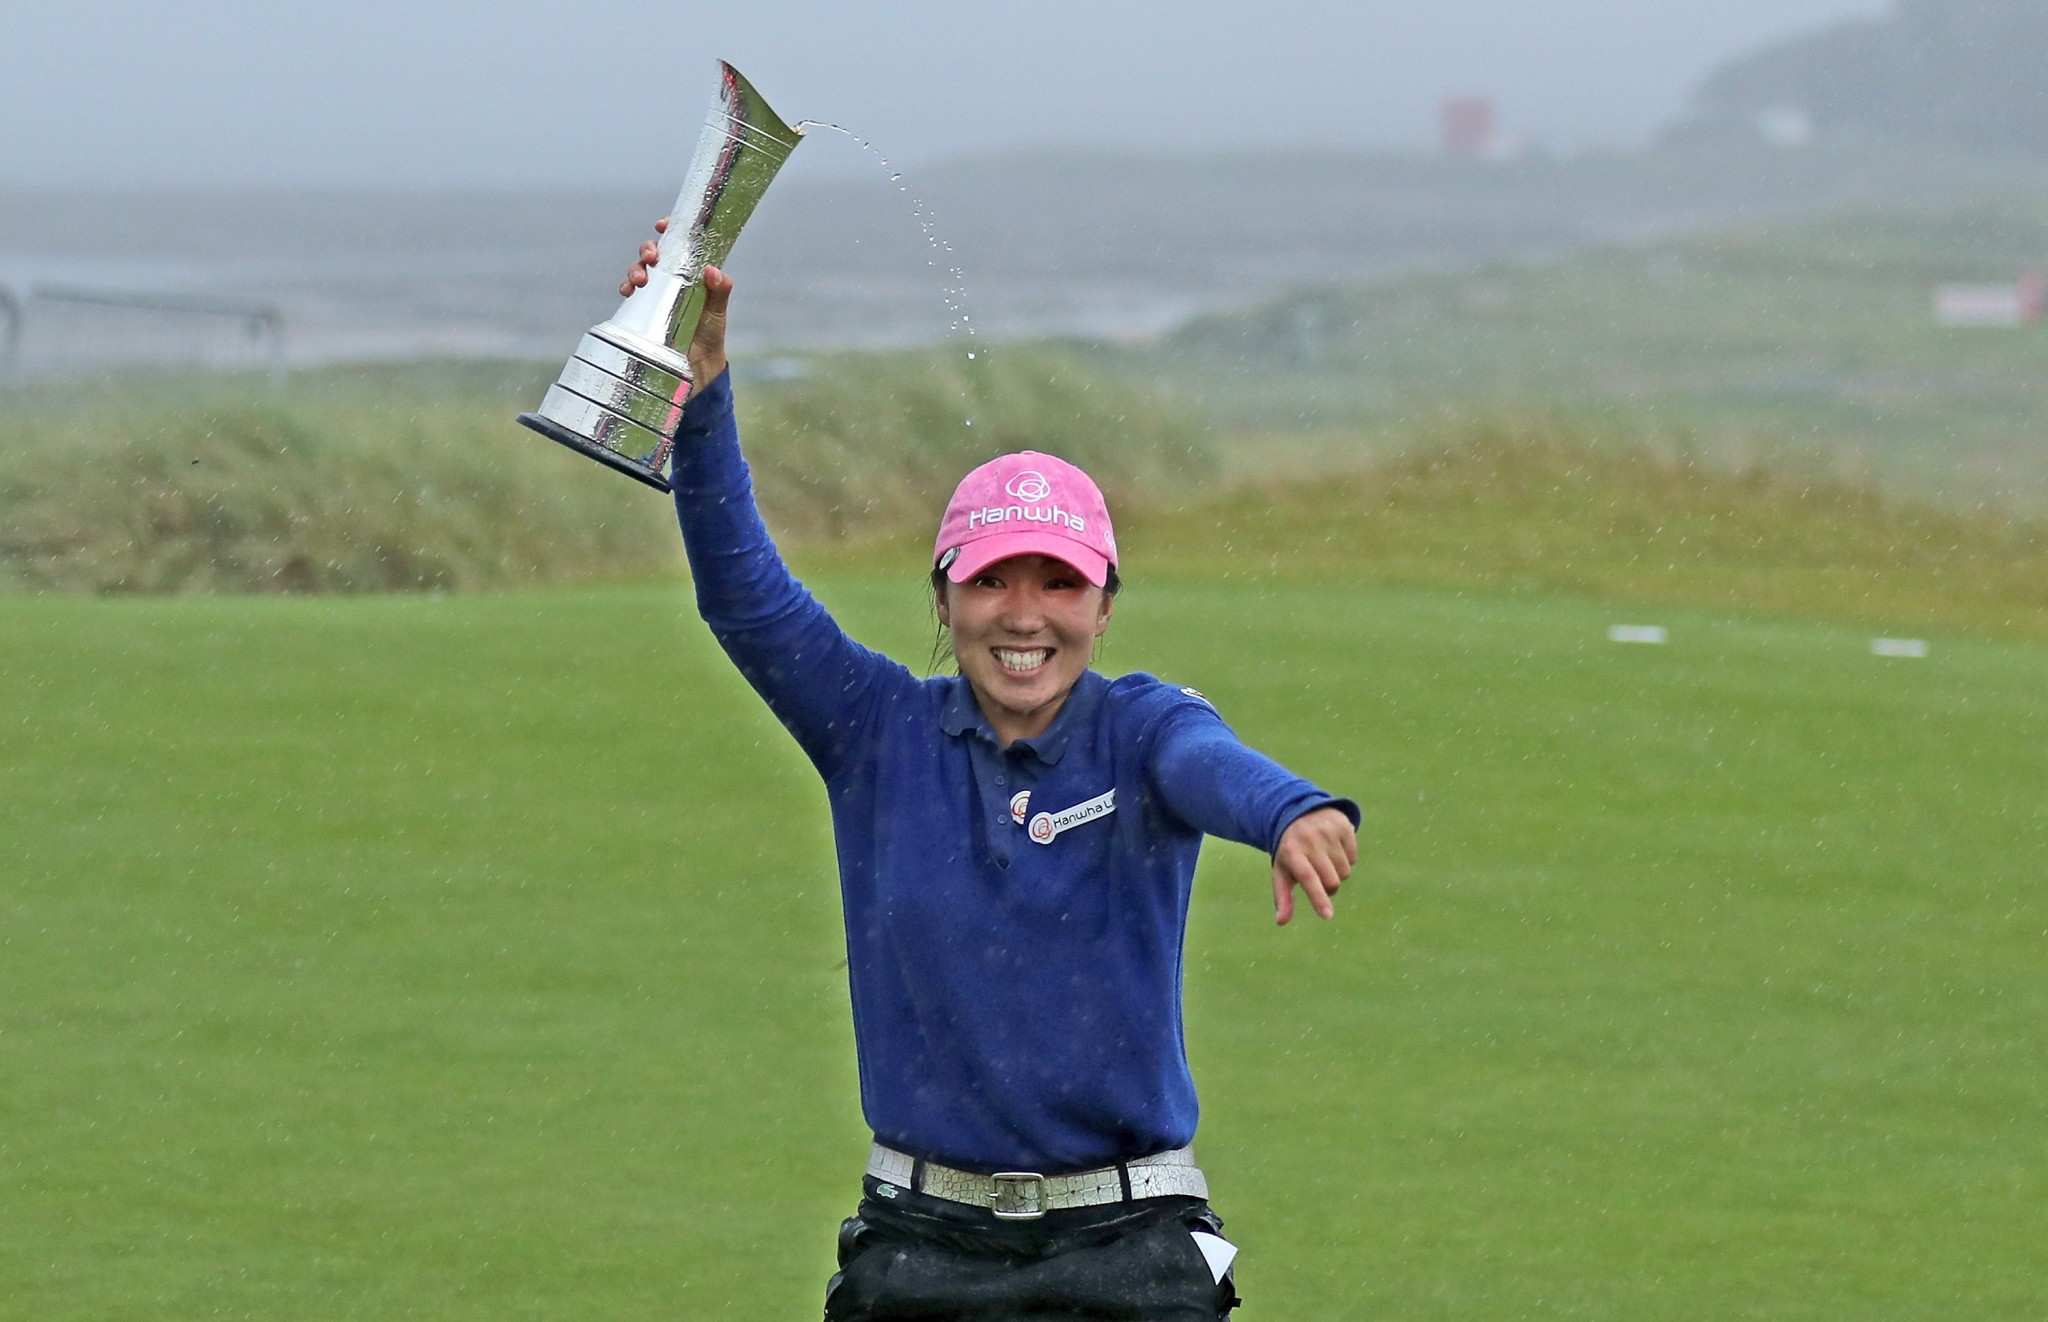 Kim clinches victory at Women’s British Open